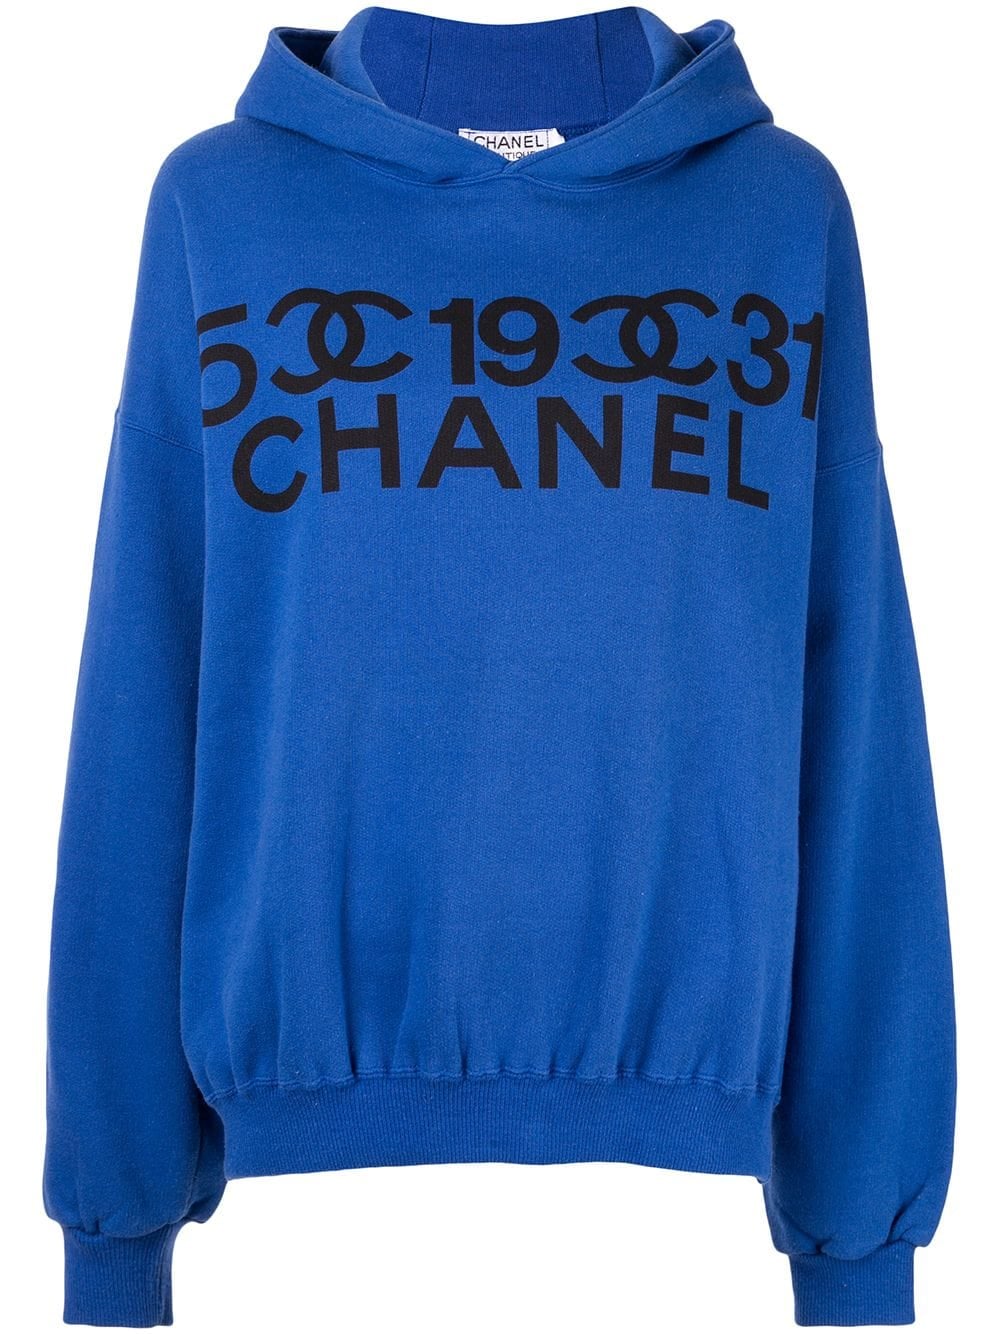 VINTAGE CHANEL SWEATER S 90S BOOTLEG